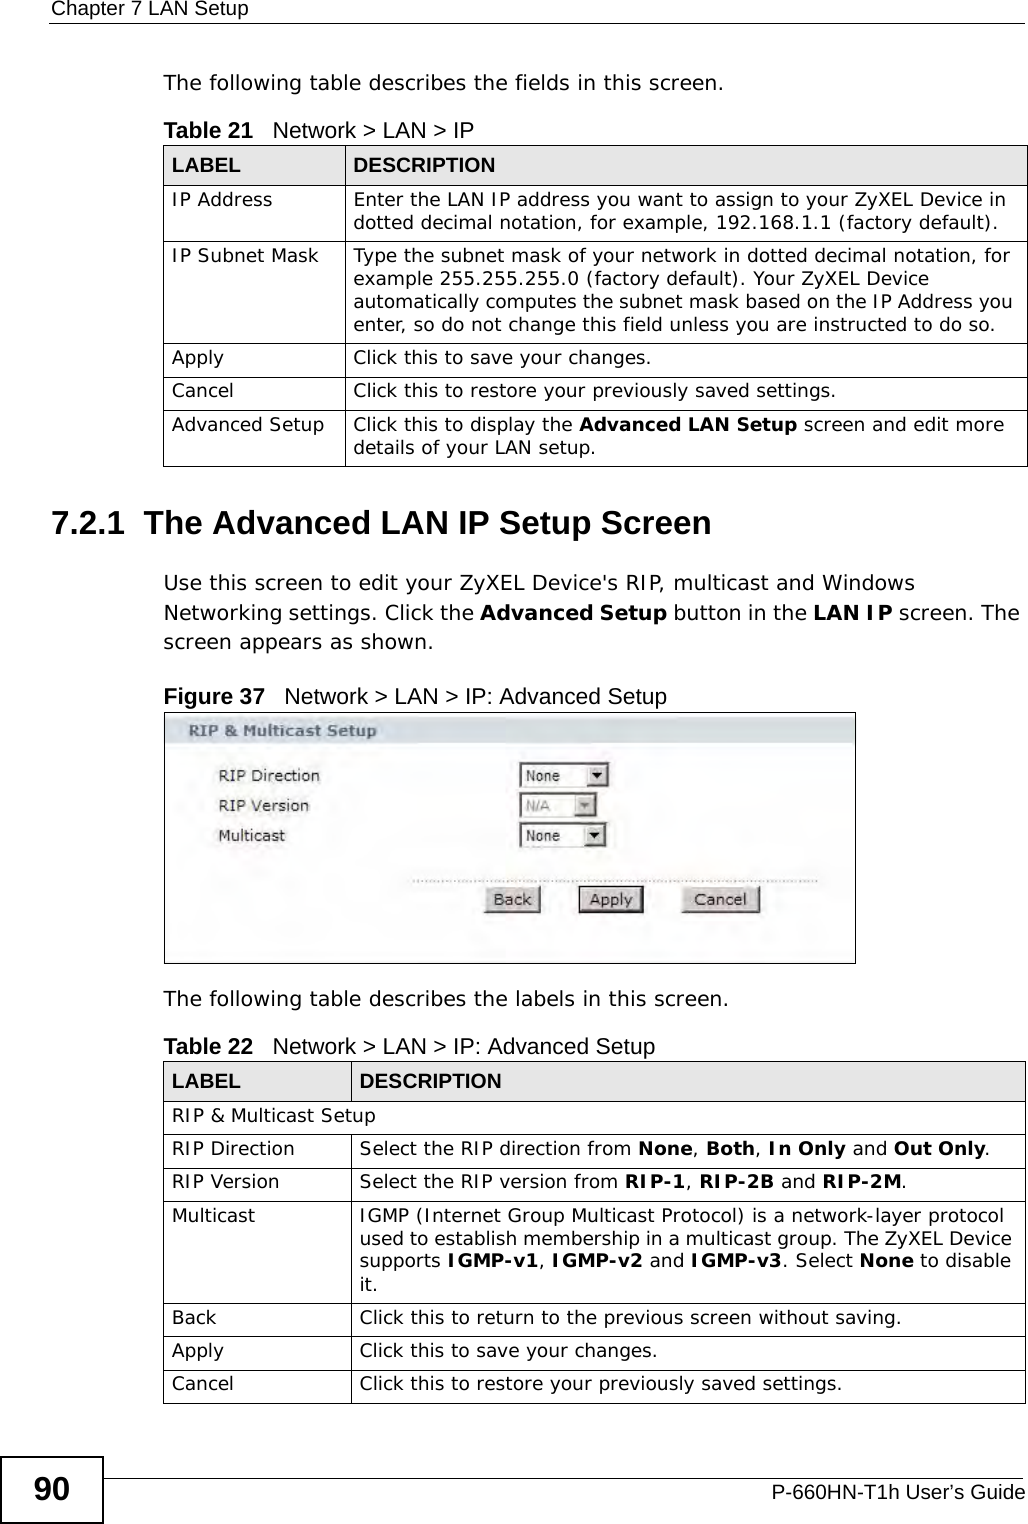 Chapter 7 LAN SetupP-660HN-T1h User’s Guide90The following table describes the fields in this screen.  7.2.1  The Advanced LAN IP Setup Screen Use this screen to edit your ZyXEL Device&apos;s RIP, multicast and Windows Networking settings. Click the Advanced Setup button in the LAN IP screen. The screen appears as shown.Figure 37   Network &gt; LAN &gt; IP: Advanced SetupThe following table describes the labels in this screen.  Table 21   Network &gt; LAN &gt; IPLABEL DESCRIPTIONIP Address Enter the LAN IP address you want to assign to your ZyXEL Device in dotted decimal notation, for example, 192.168.1.1 (factory default). IP Subnet Mask  Type the subnet mask of your network in dotted decimal notation, for example 255.255.255.0 (factory default). Your ZyXEL Device automatically computes the subnet mask based on the IP Address you enter, so do not change this field unless you are instructed to do so.Apply Click this to save your changes.Cancel Click this to restore your previously saved settings.Advanced Setup Click this to display the Advanced LAN Setup screen and edit more details of your LAN setup.Table 22   Network &gt; LAN &gt; IP: Advanced SetupLABEL DESCRIPTIONRIP &amp; Multicast SetupRIP Direction Select the RIP direction from None, Both, In Only and Out Only.RIP Version Select the RIP version from RIP-1, RIP-2B and RIP-2M.Multicast IGMP (Internet Group Multicast Protocol) is a network-layer protocol used to establish membership in a multicast group. The ZyXEL Device supports IGMP-v1, IGMP-v2 and IGMP-v3. Select None to disable it.Back Click this to return to the previous screen without saving.Apply Click this to save your changes.Cancel Click this to restore your previously saved settings.